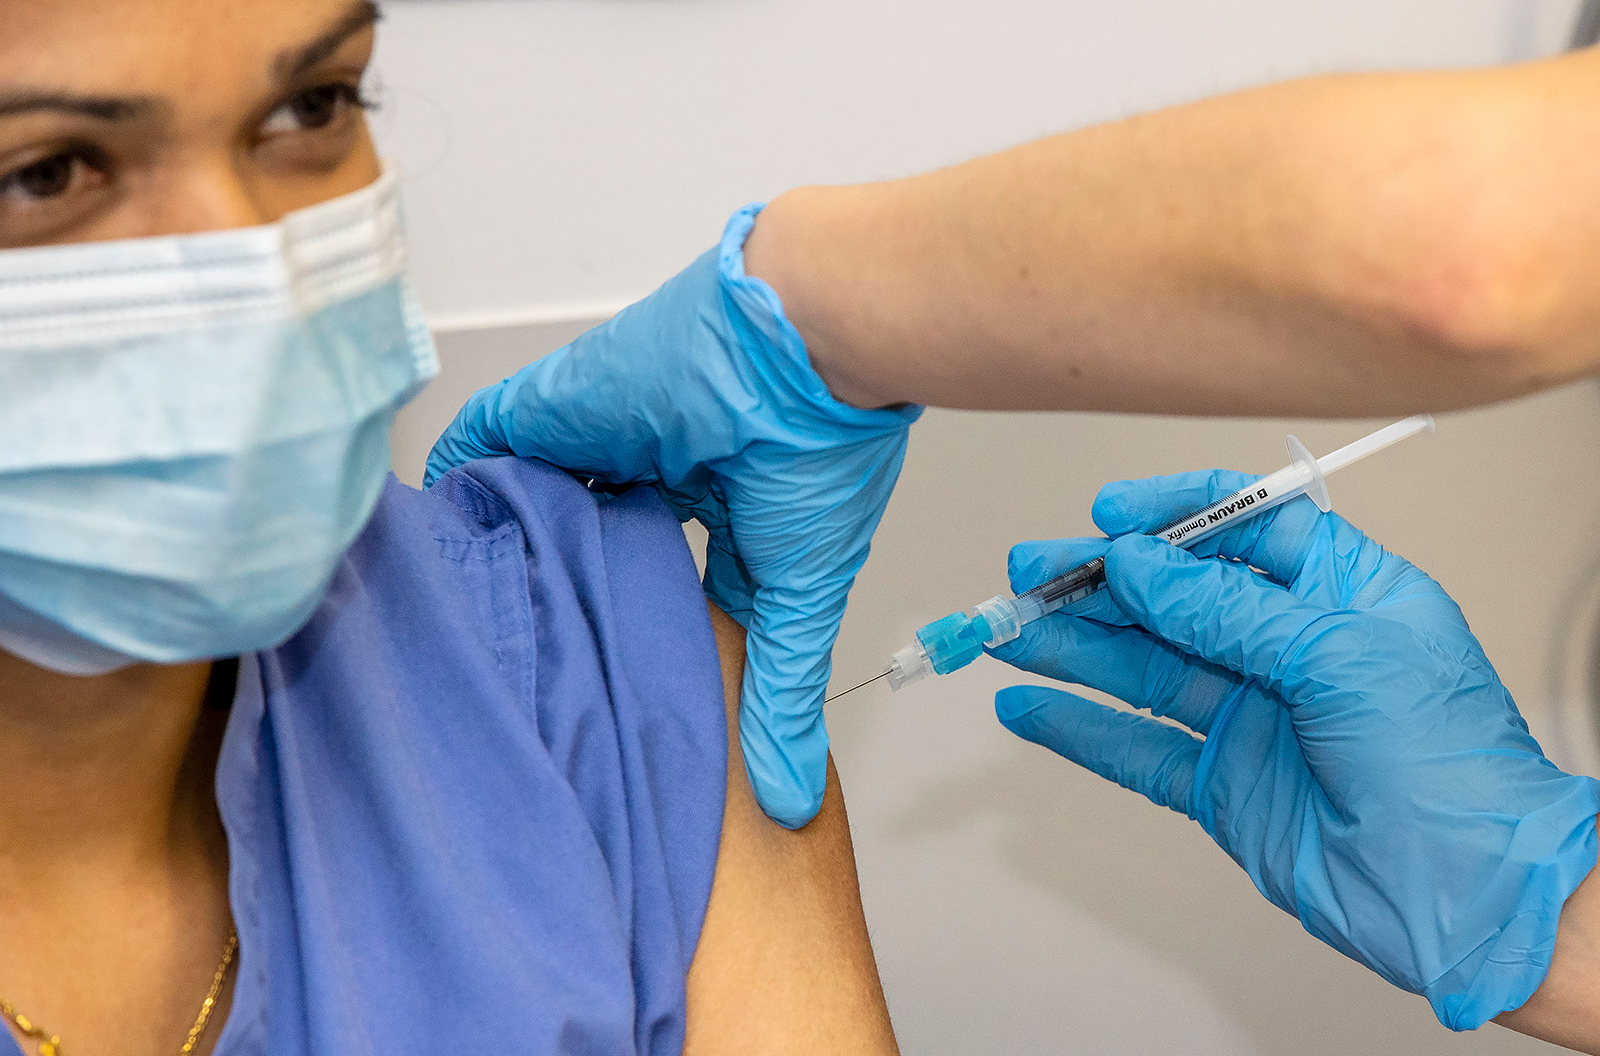 Healthcare worker Nithya Rajendran receives an injection of the Pfizer-BioNTech Covid-19 vaccine at St James's Hospital in Dublin on December 29, 2020.